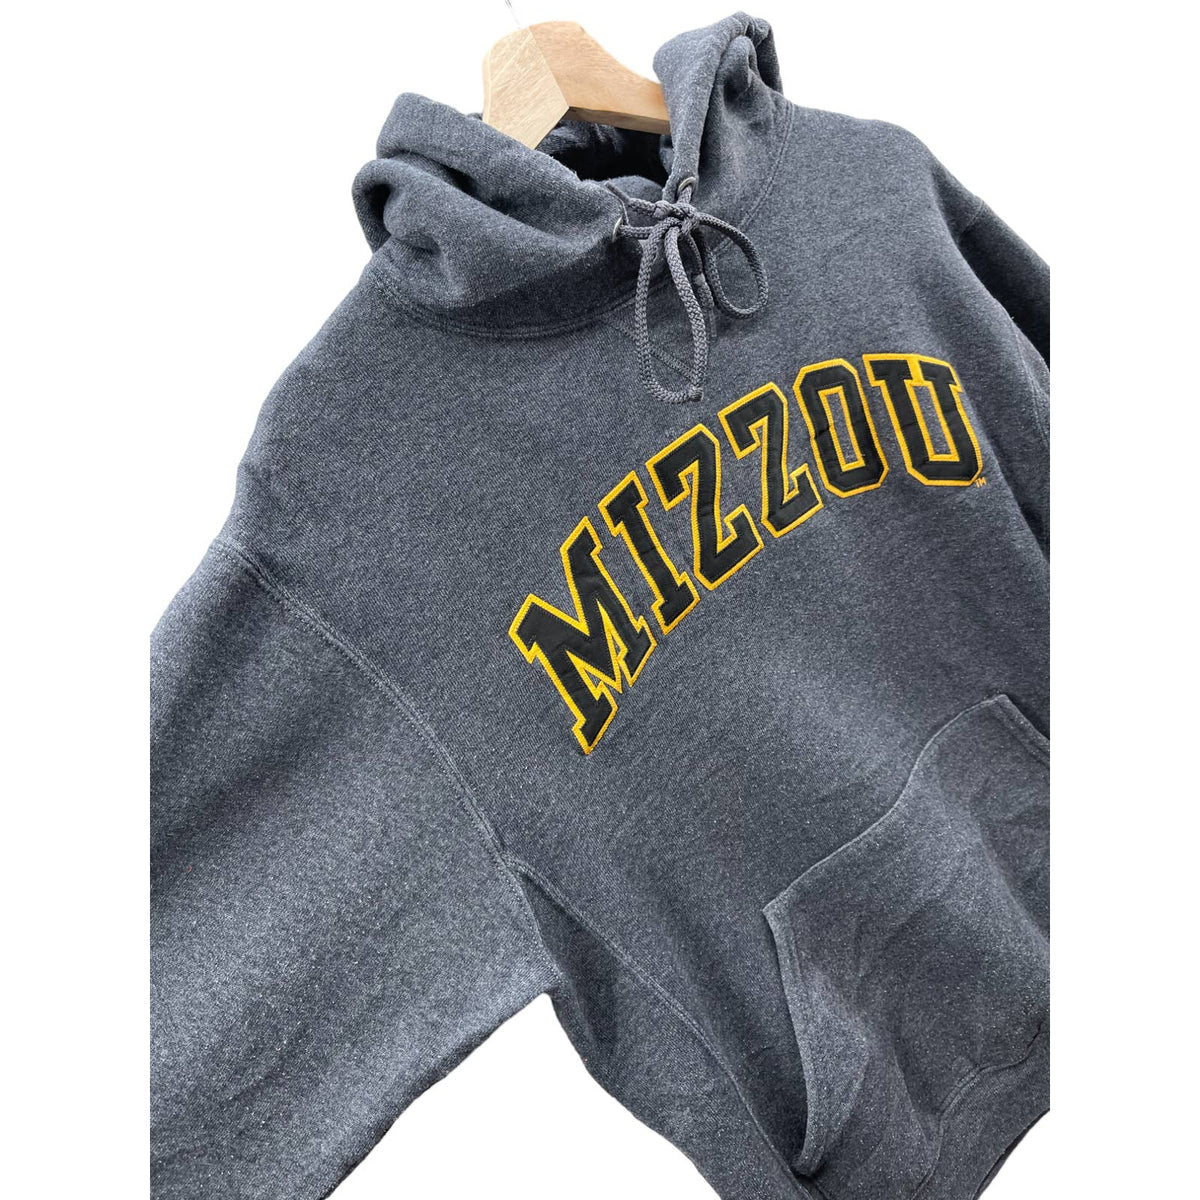 Vintage 1990's Russell Athletic Mizzou College Embroidered Hoodie